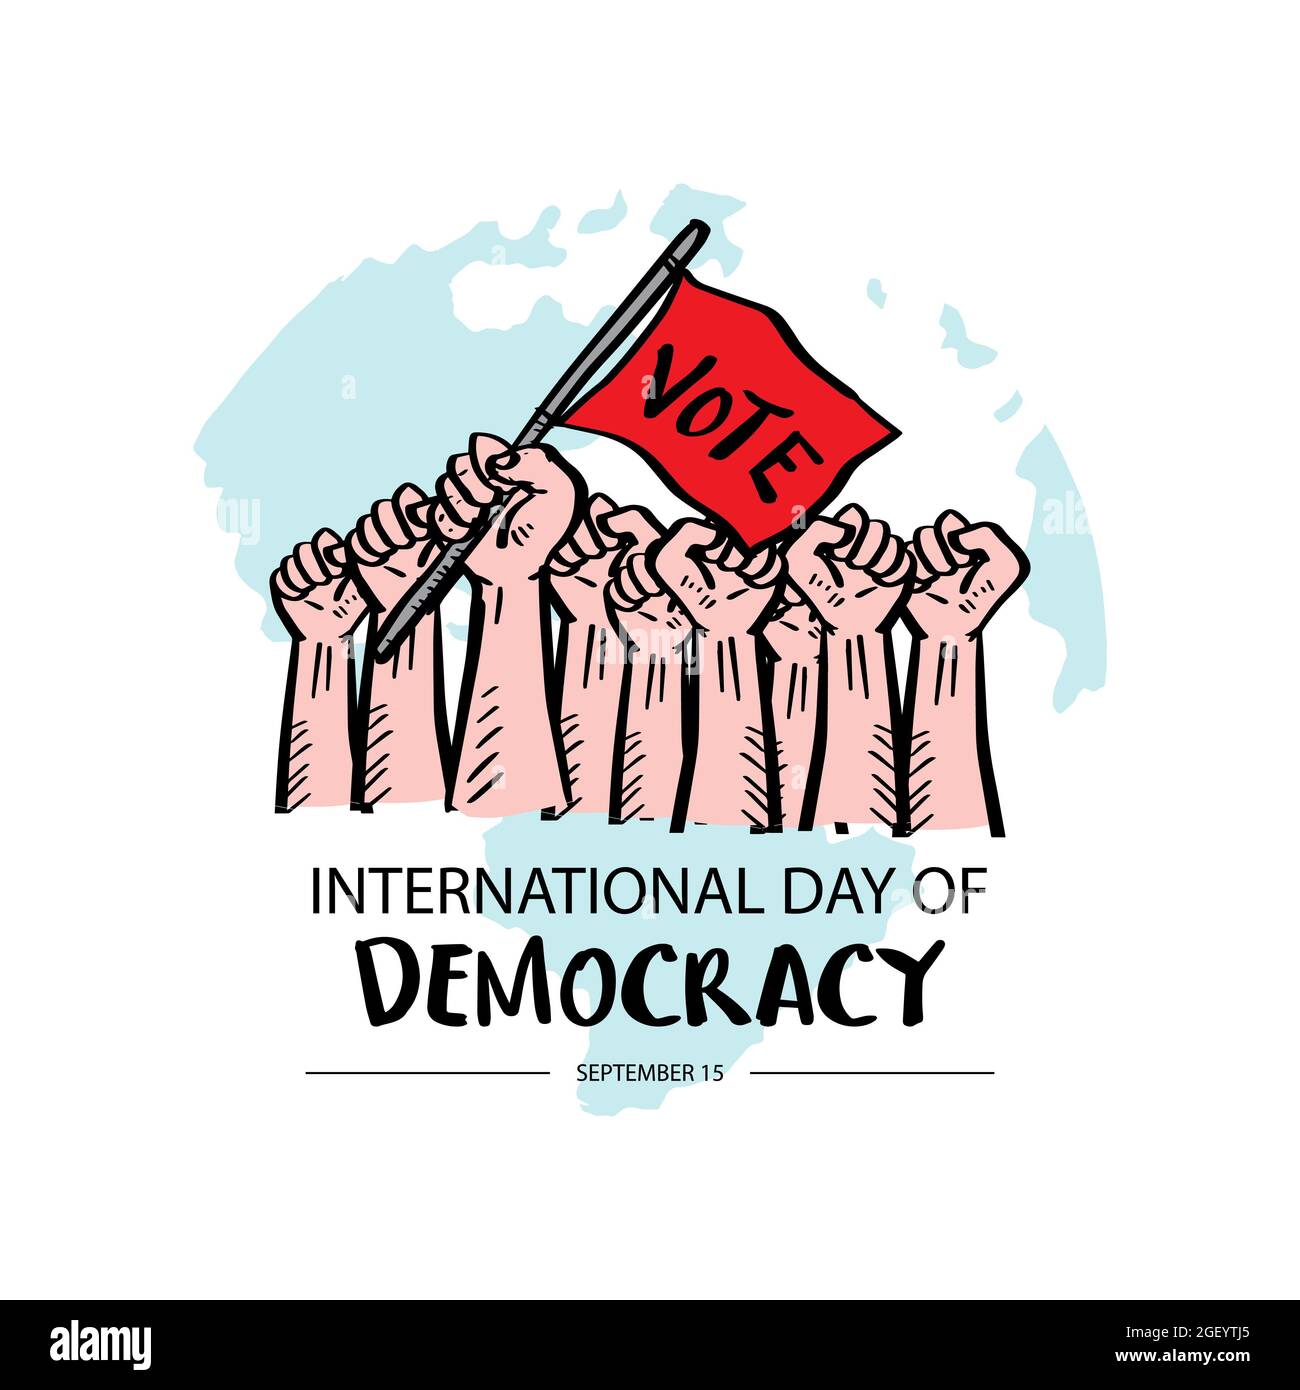 International day of democracy, September 15. Poster concept. Stock Photo